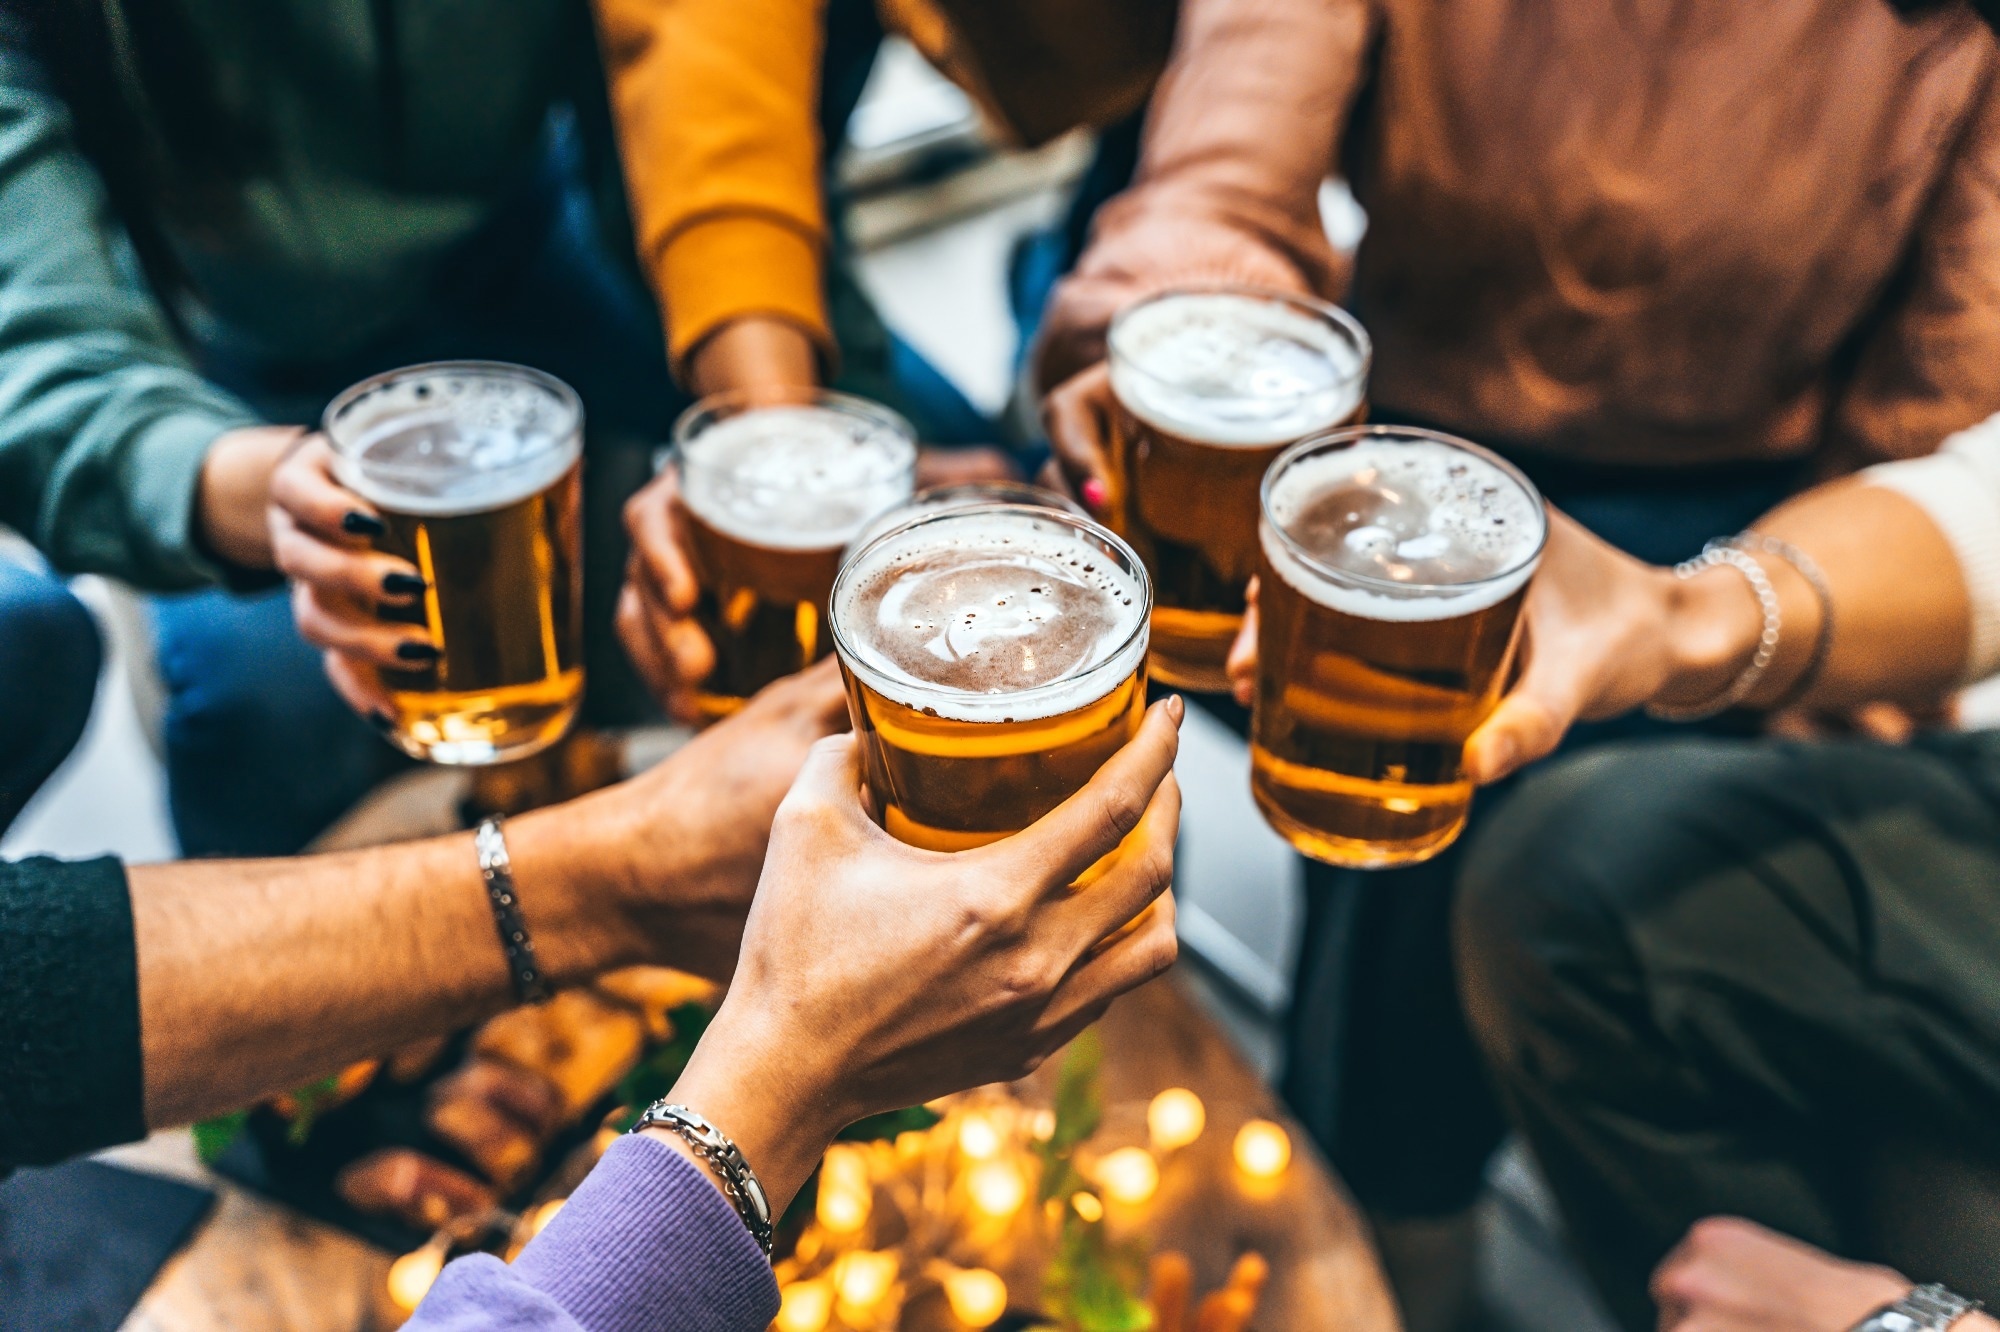 Study: A physiologically-based digital twin for alcohol consumption—predicting real-life drinking responses and long-term plasma PEth. Image Credit: niksdope / Shutterstock.com